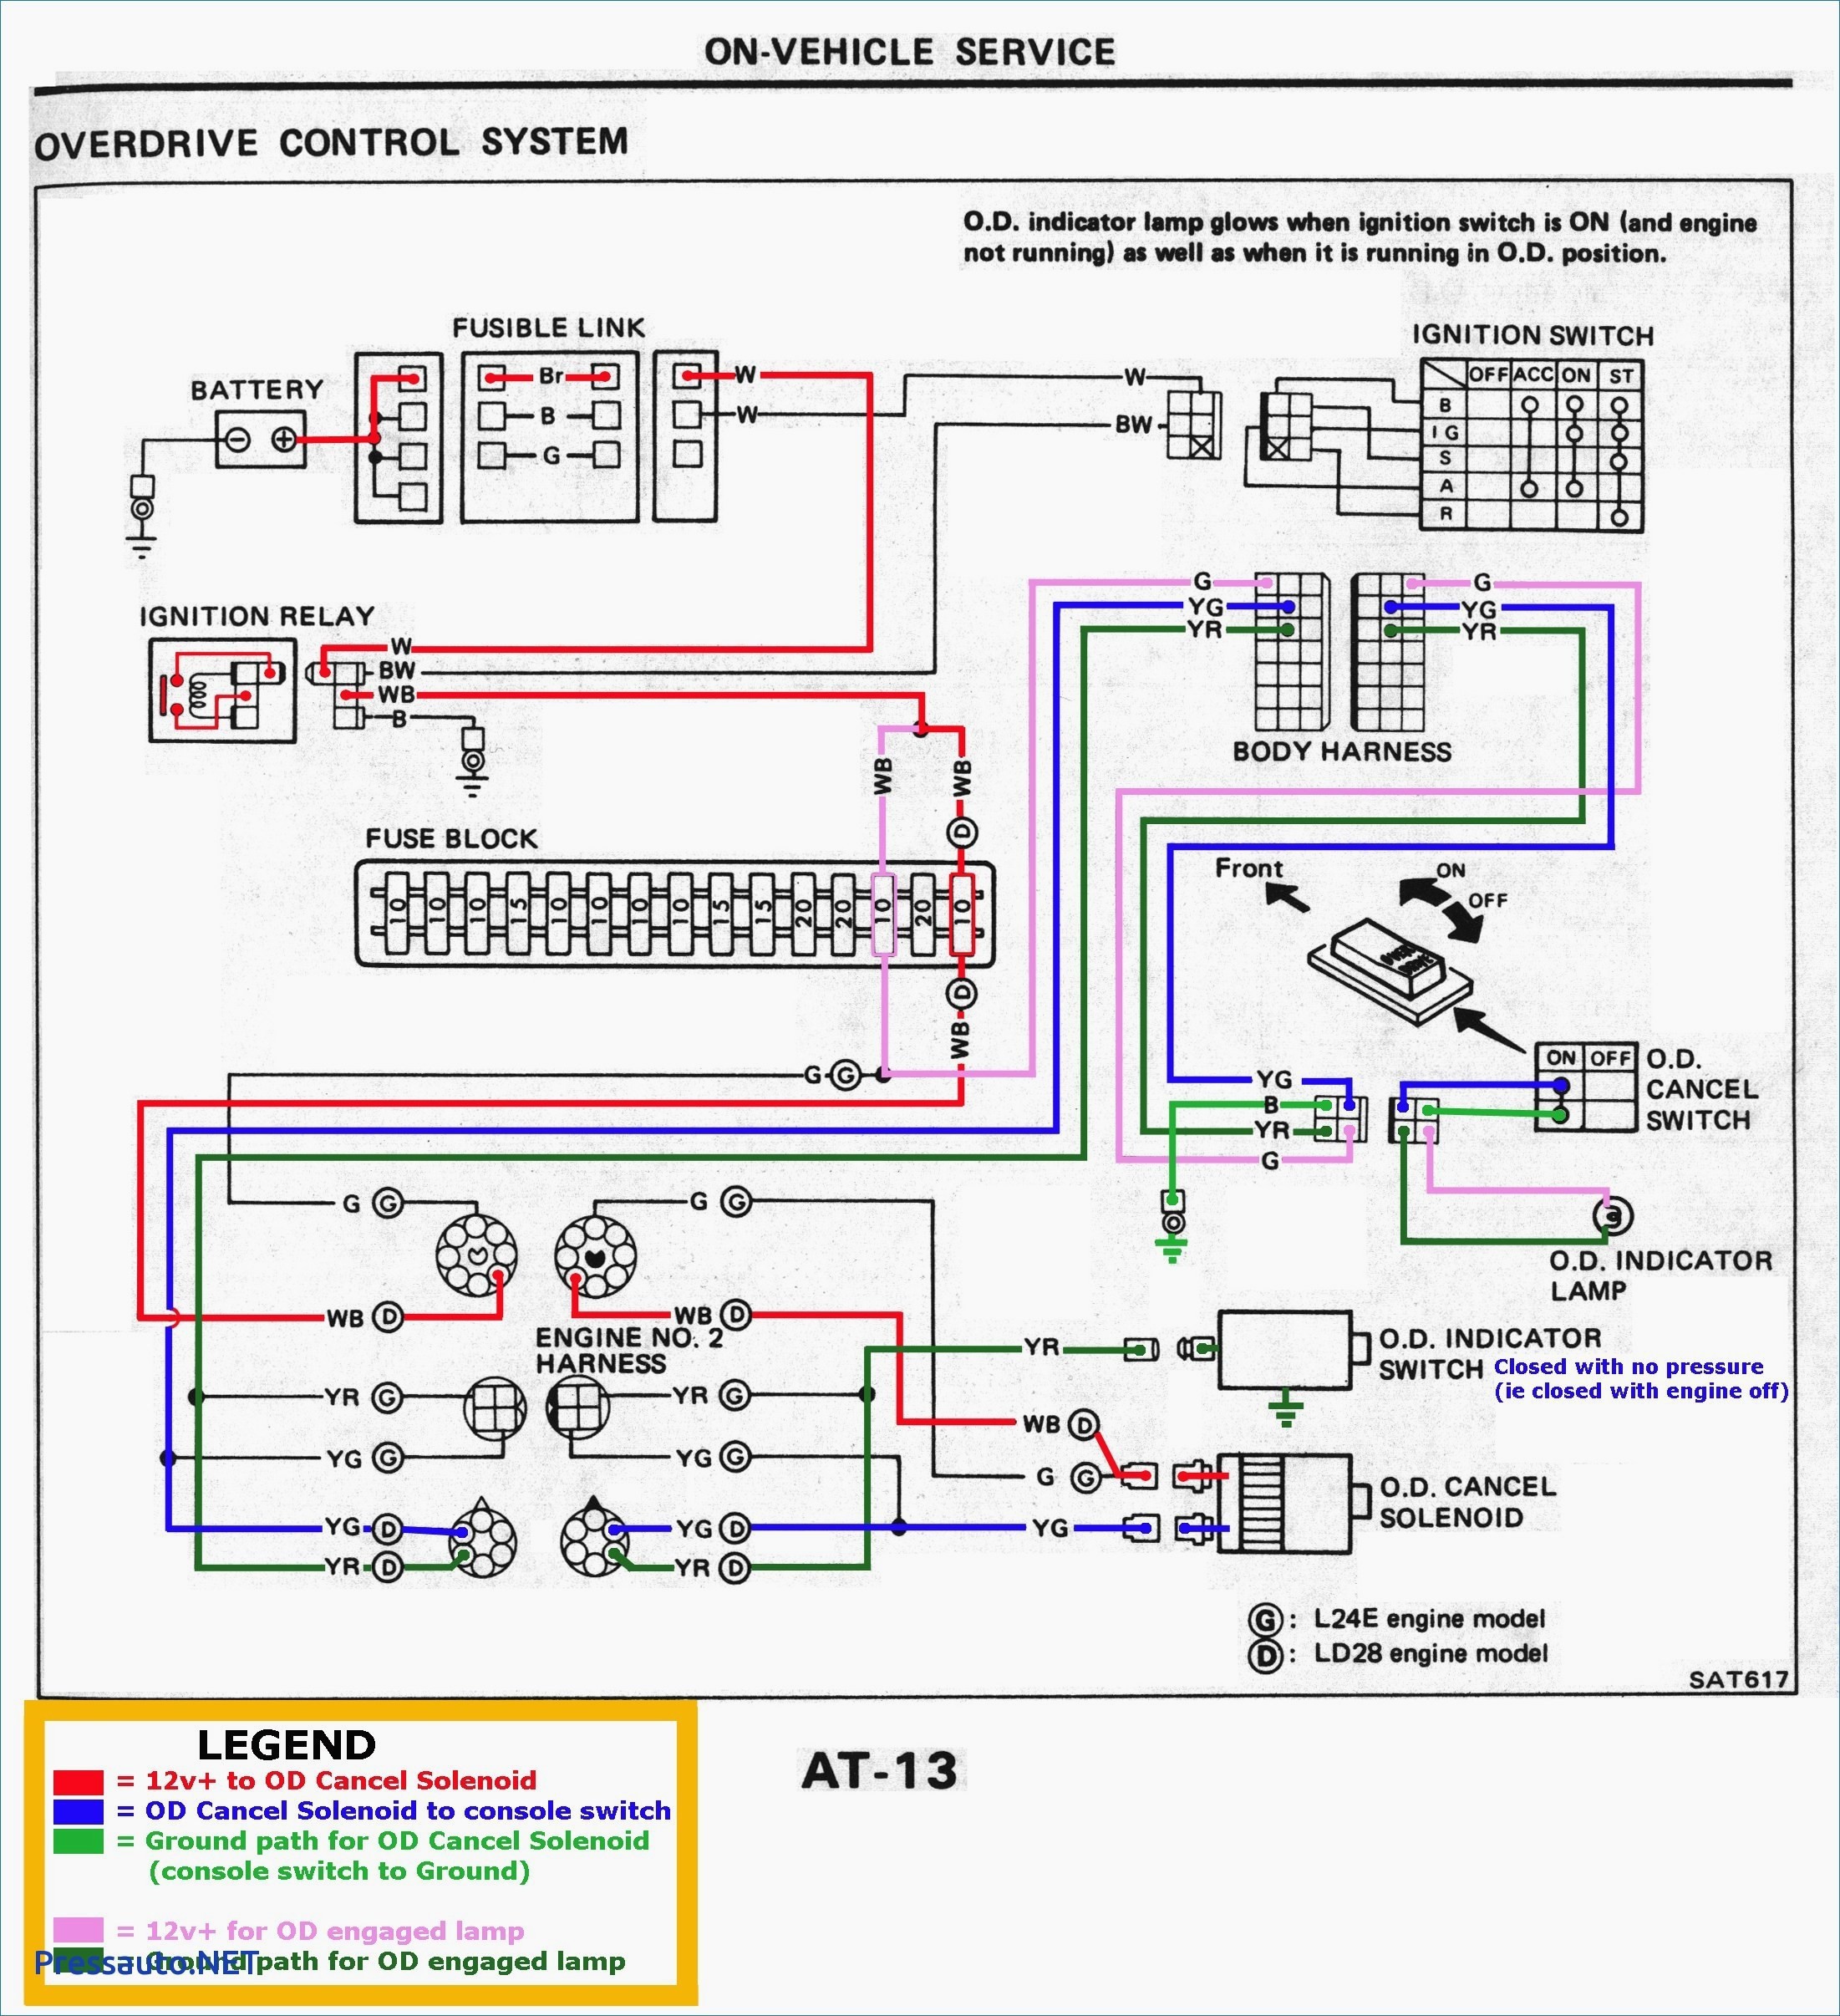 2004 ford Expedition Stereo Wiring Diagram 2018 2006 ford Expedition Wiring Diagram 0d – Wiring Diagram